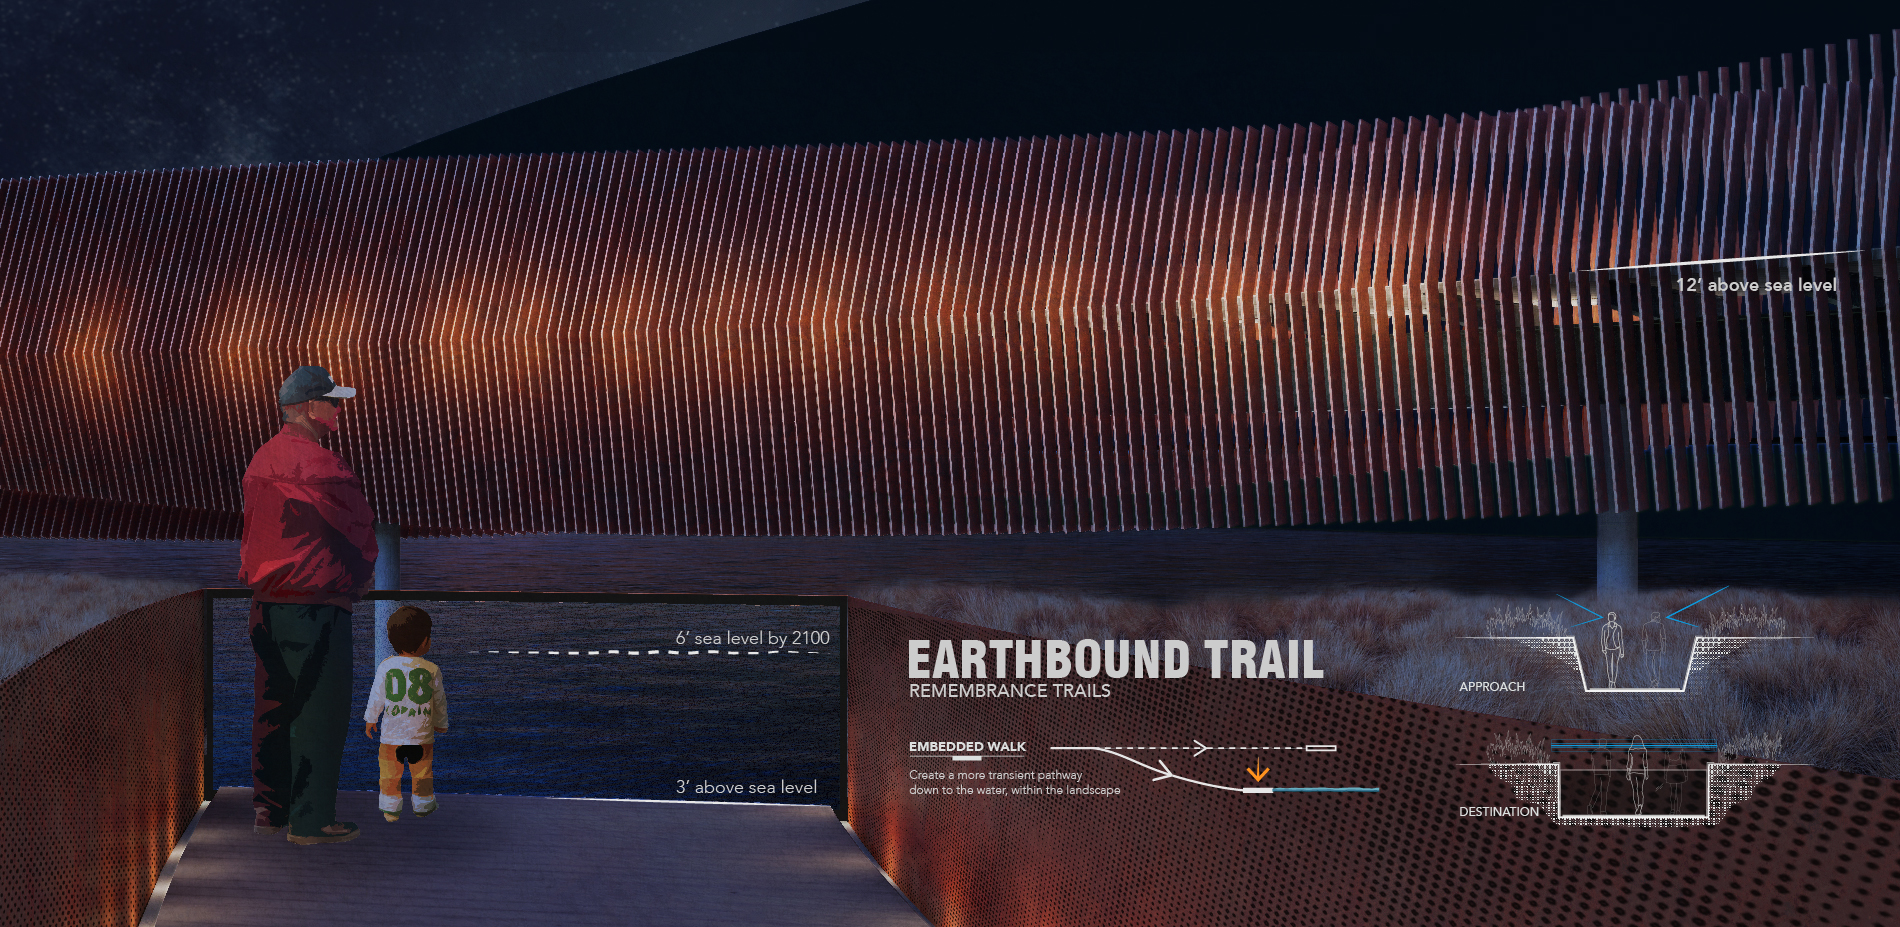 The Earthbound Trail